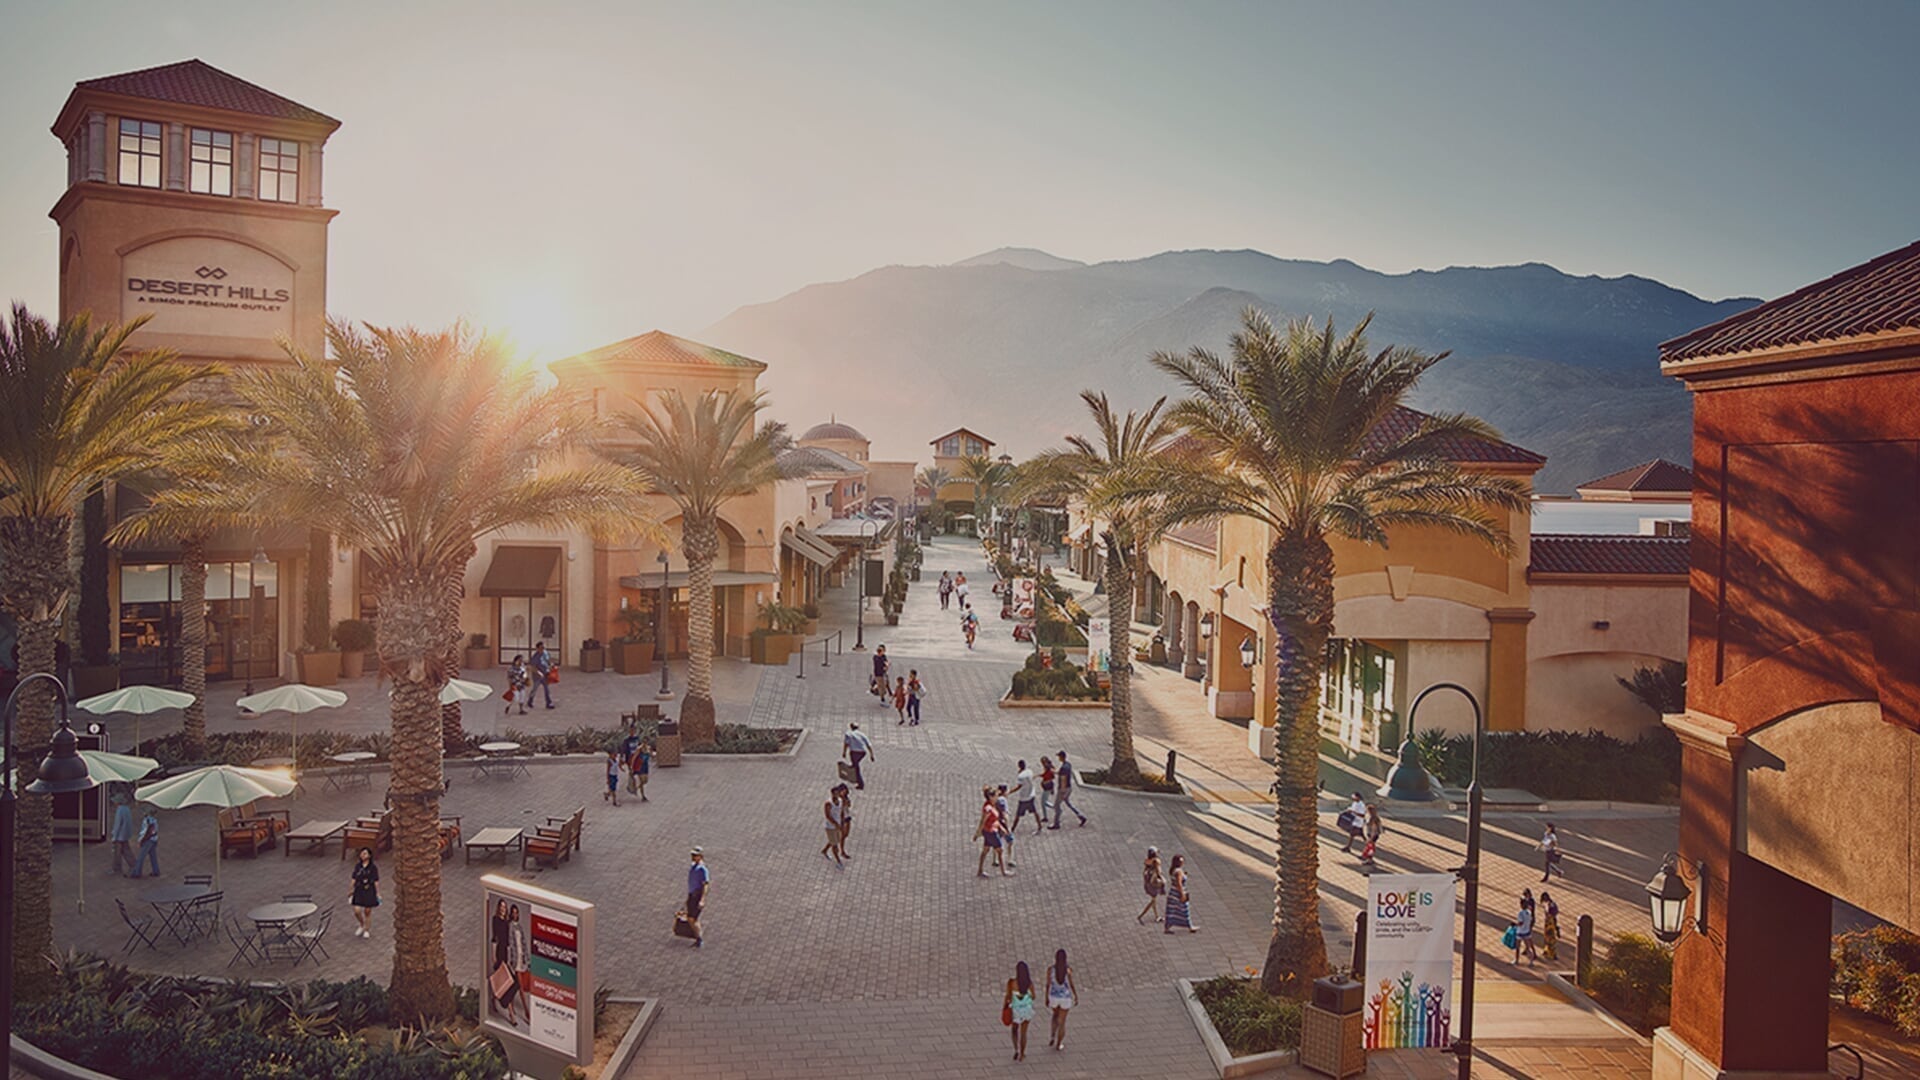 Welcome To Desert Hills Premium Outlets® - A Shopping Center In Cabazon, CA - A Simon Property